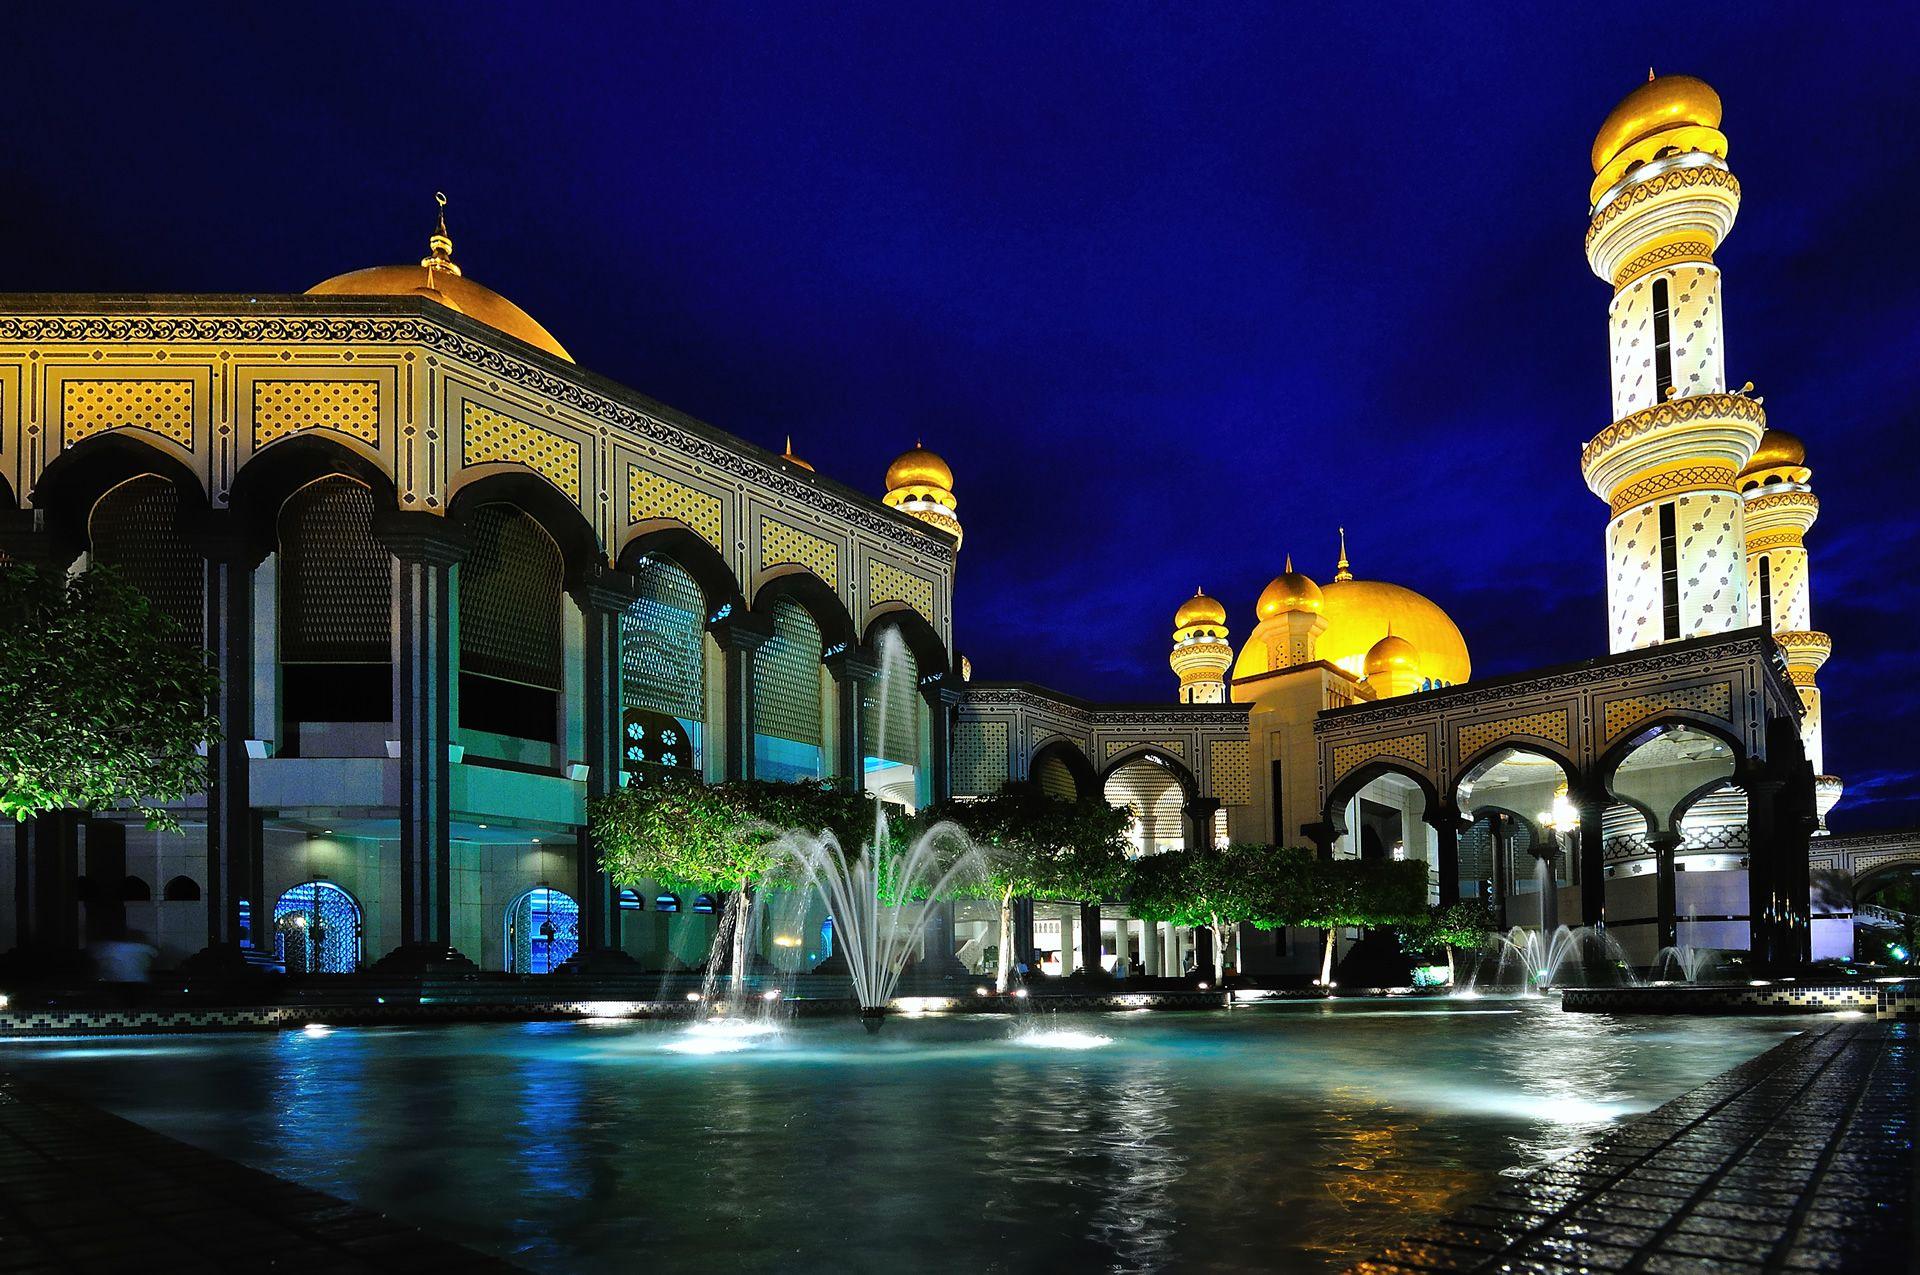 HD brunei super palace Wallpaper Post has been published